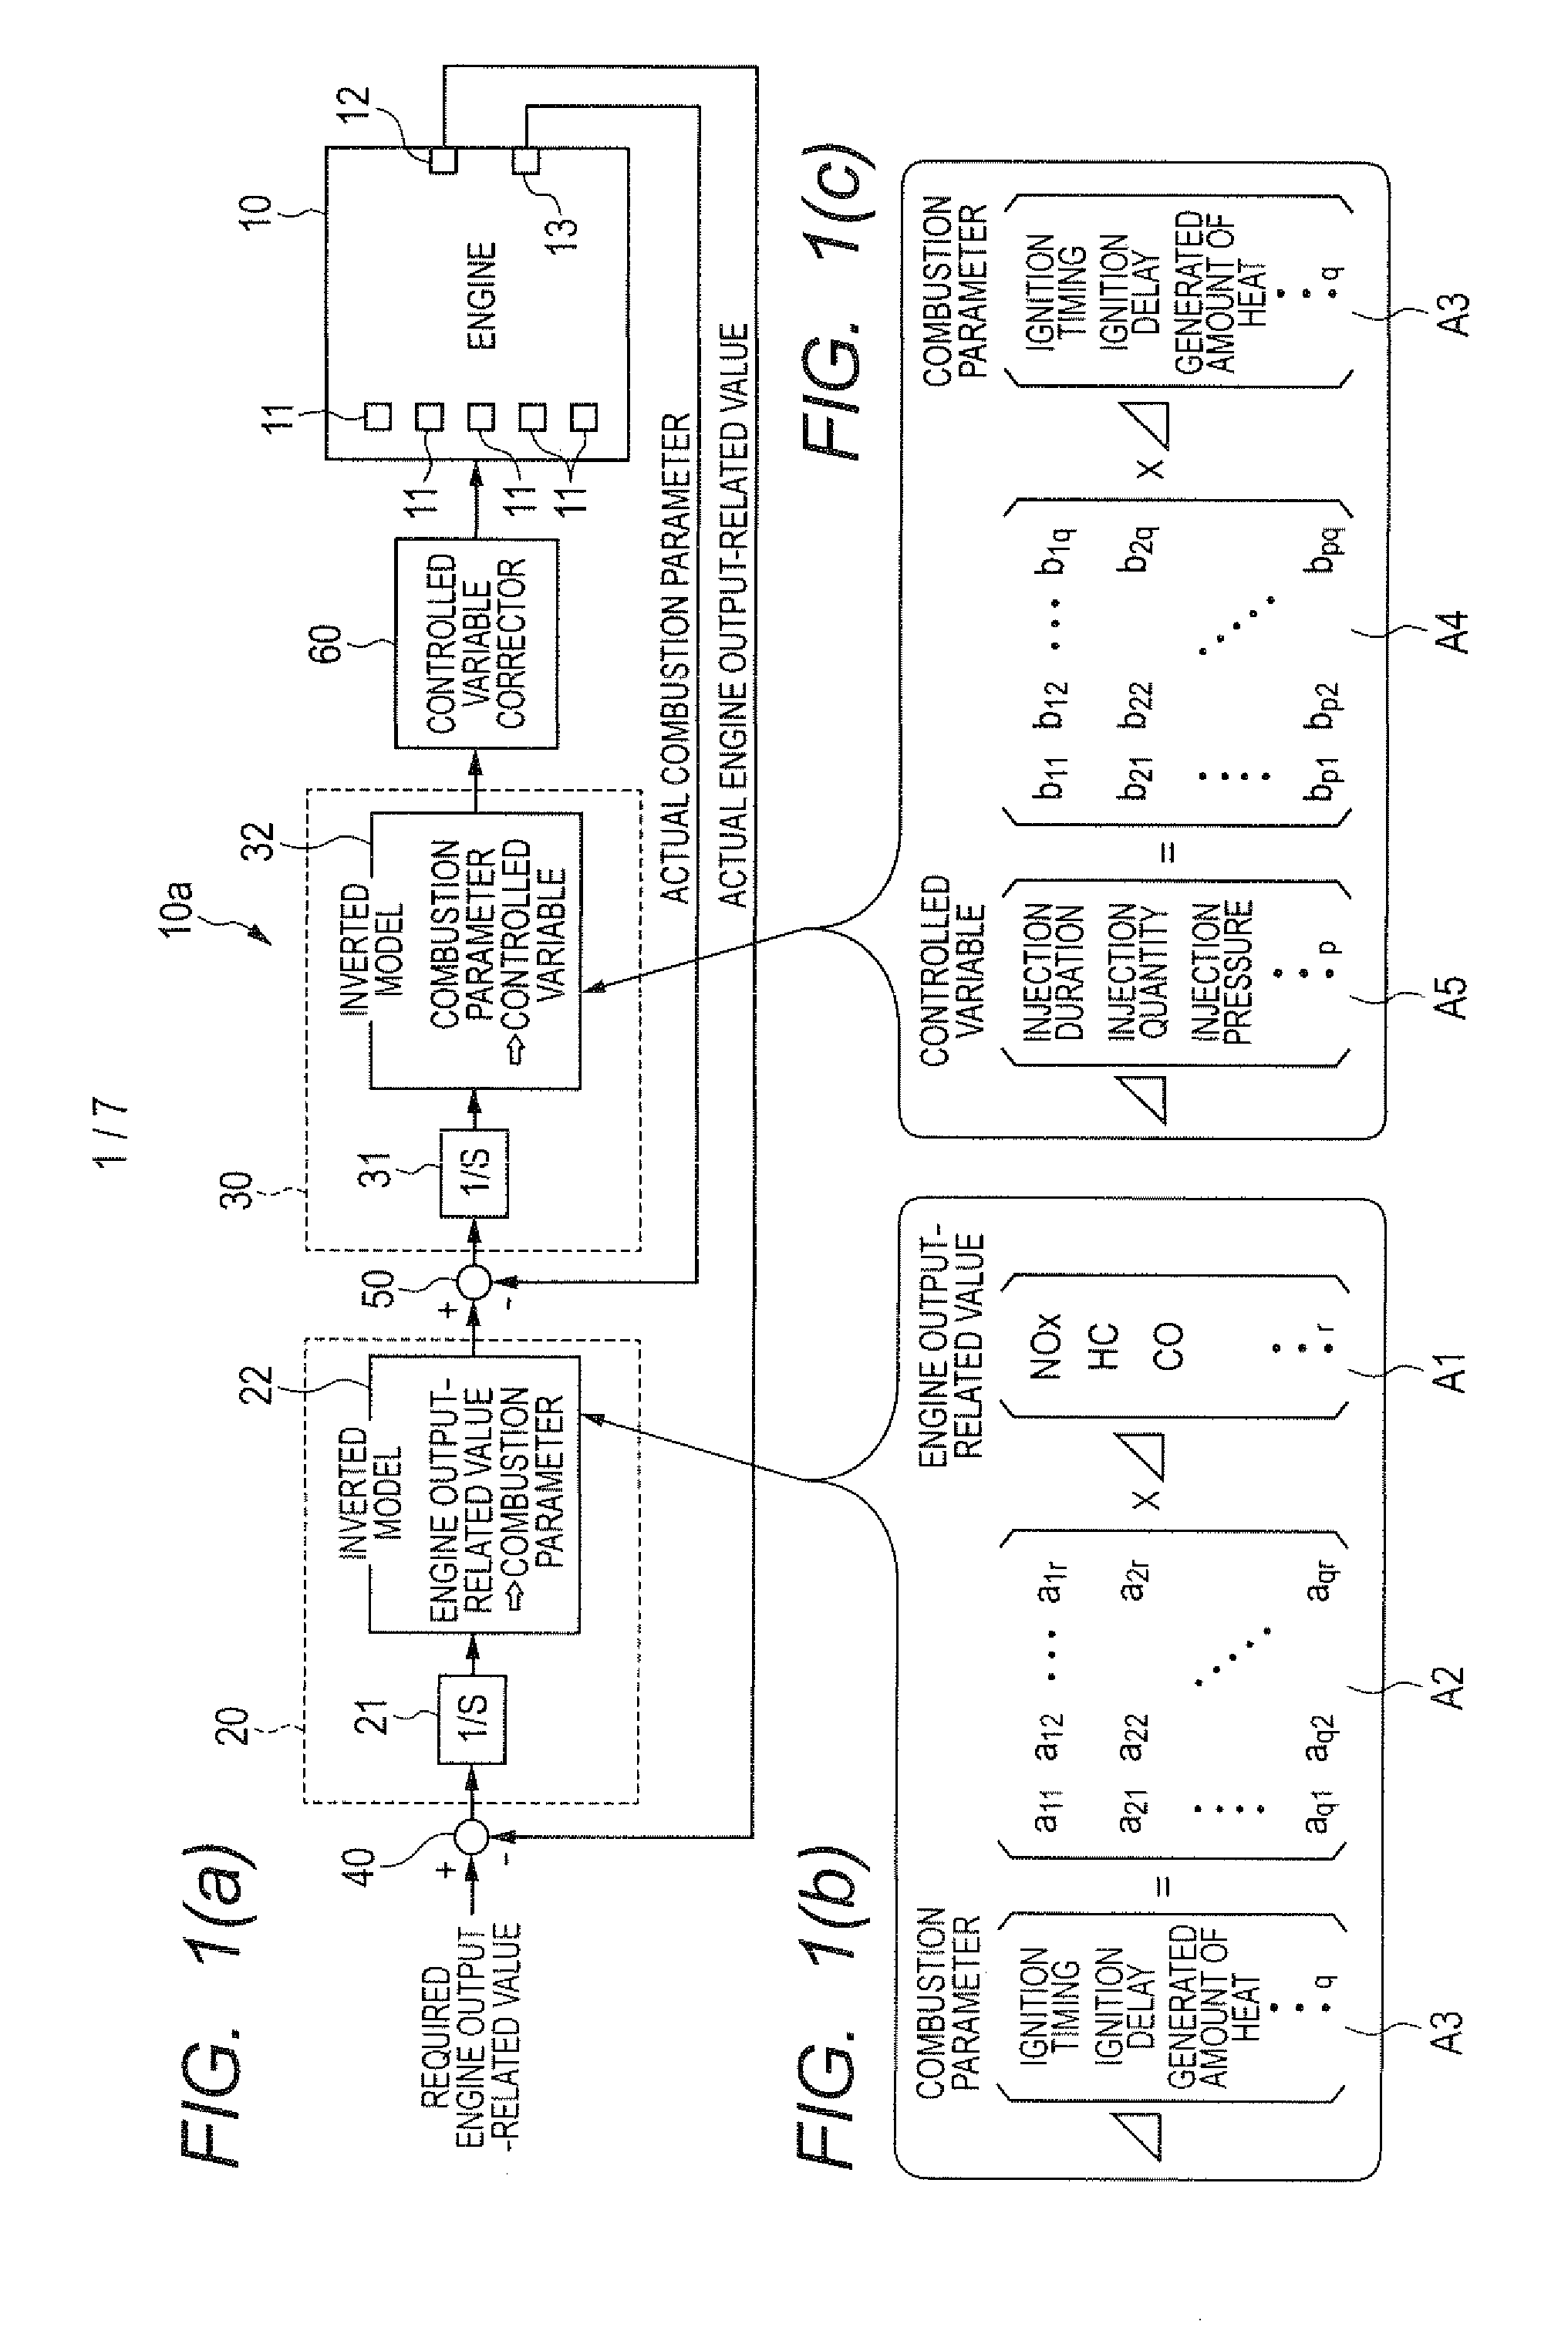 Engine control system with algorithm for actuator control